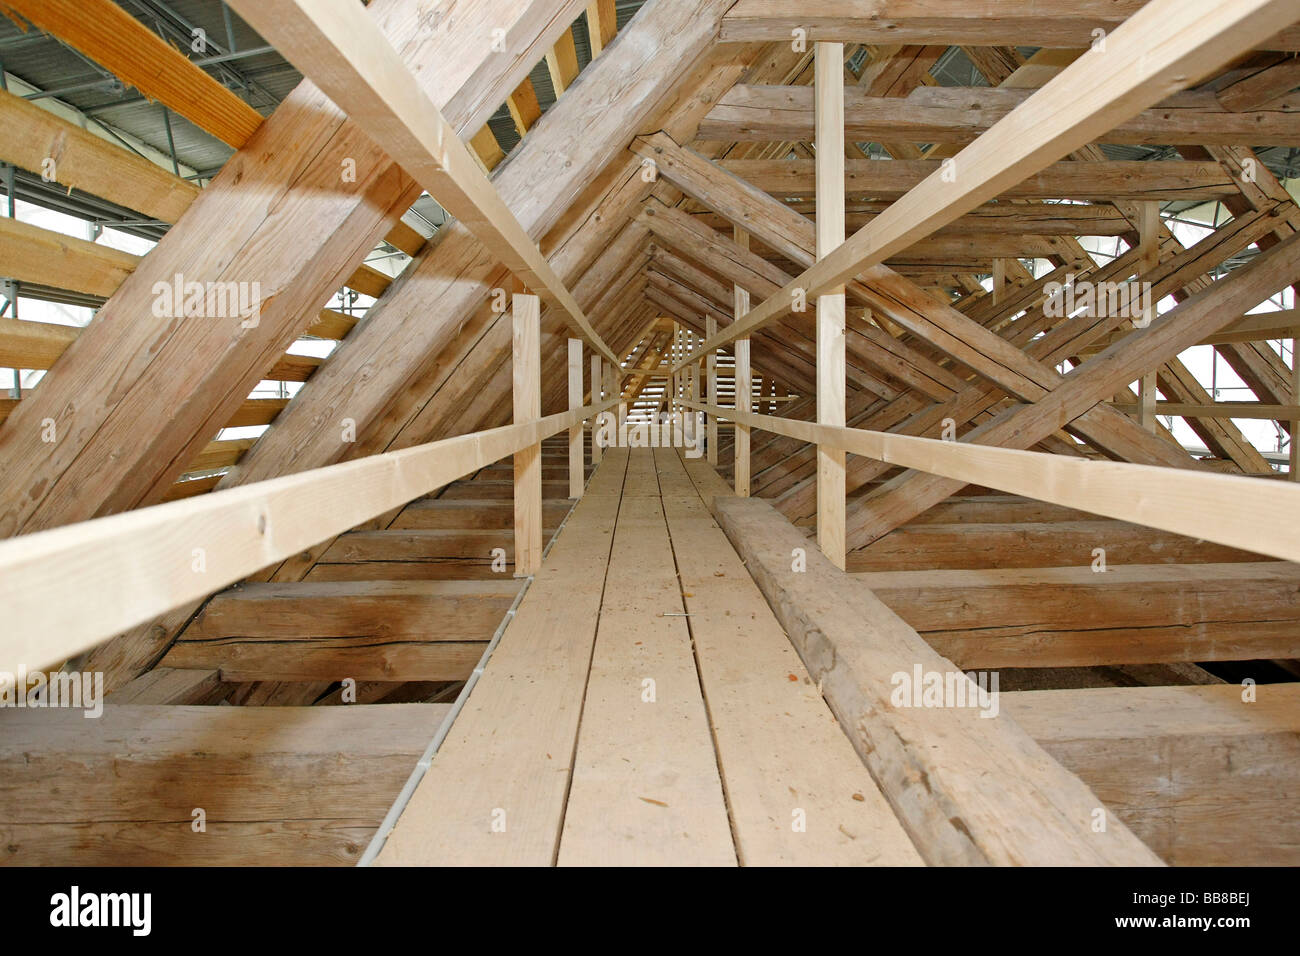 Intermediate status of the work on the roof structure, St. Leonhard church, Dietramszell, Bavaria, Germany Stock Photo